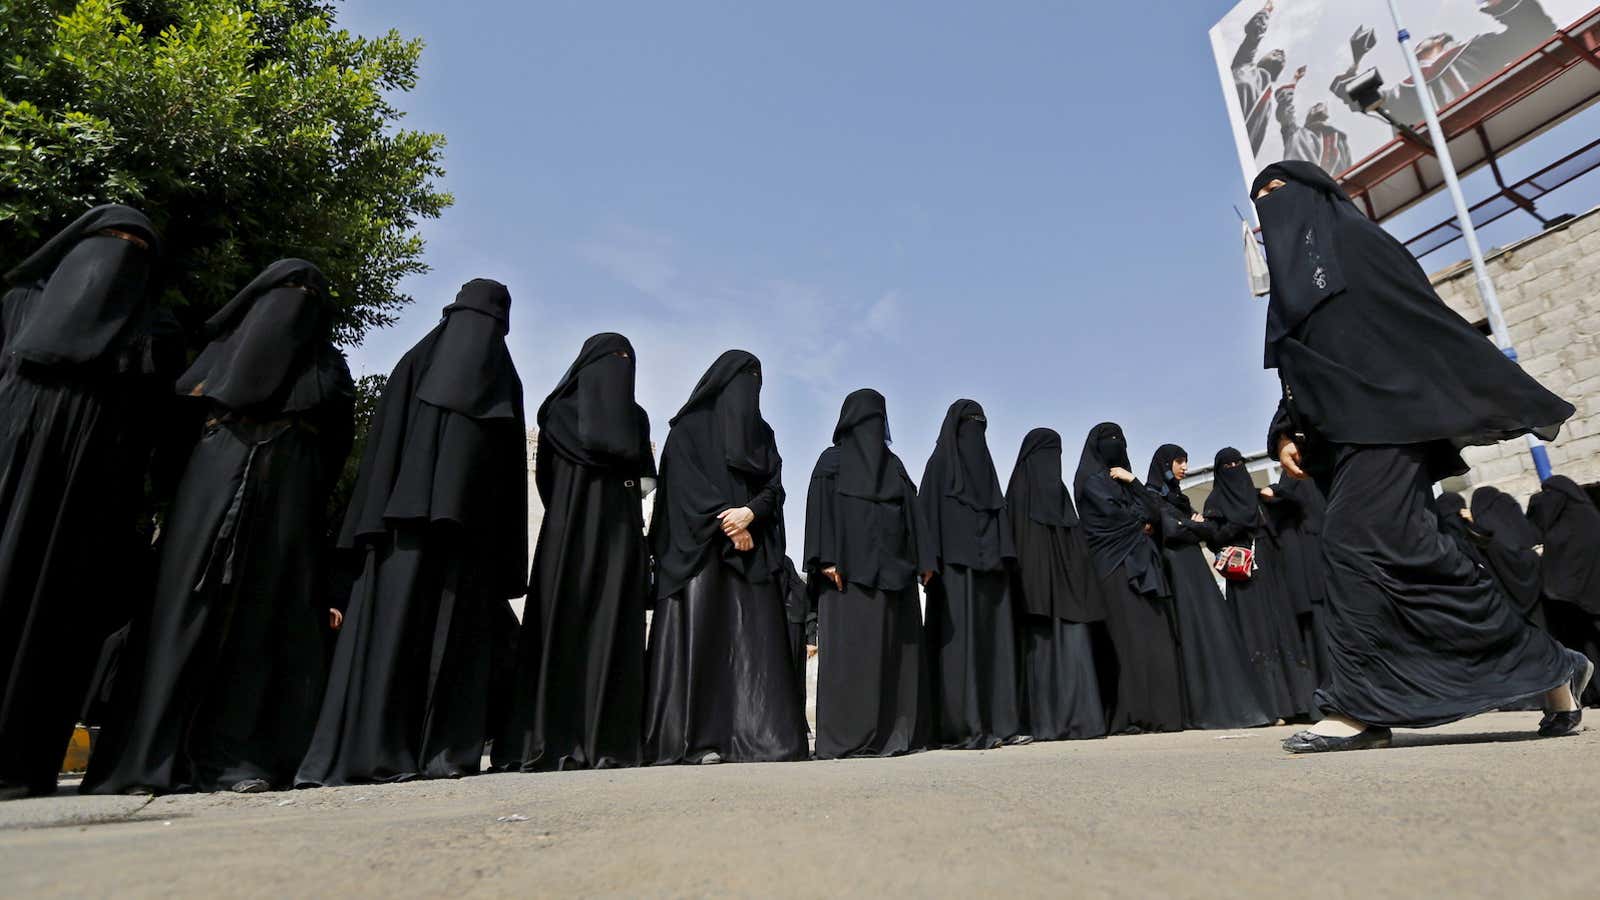 Because of restrictive religious laws, exercise is all-but-banned for the women of Saudi Arabia.